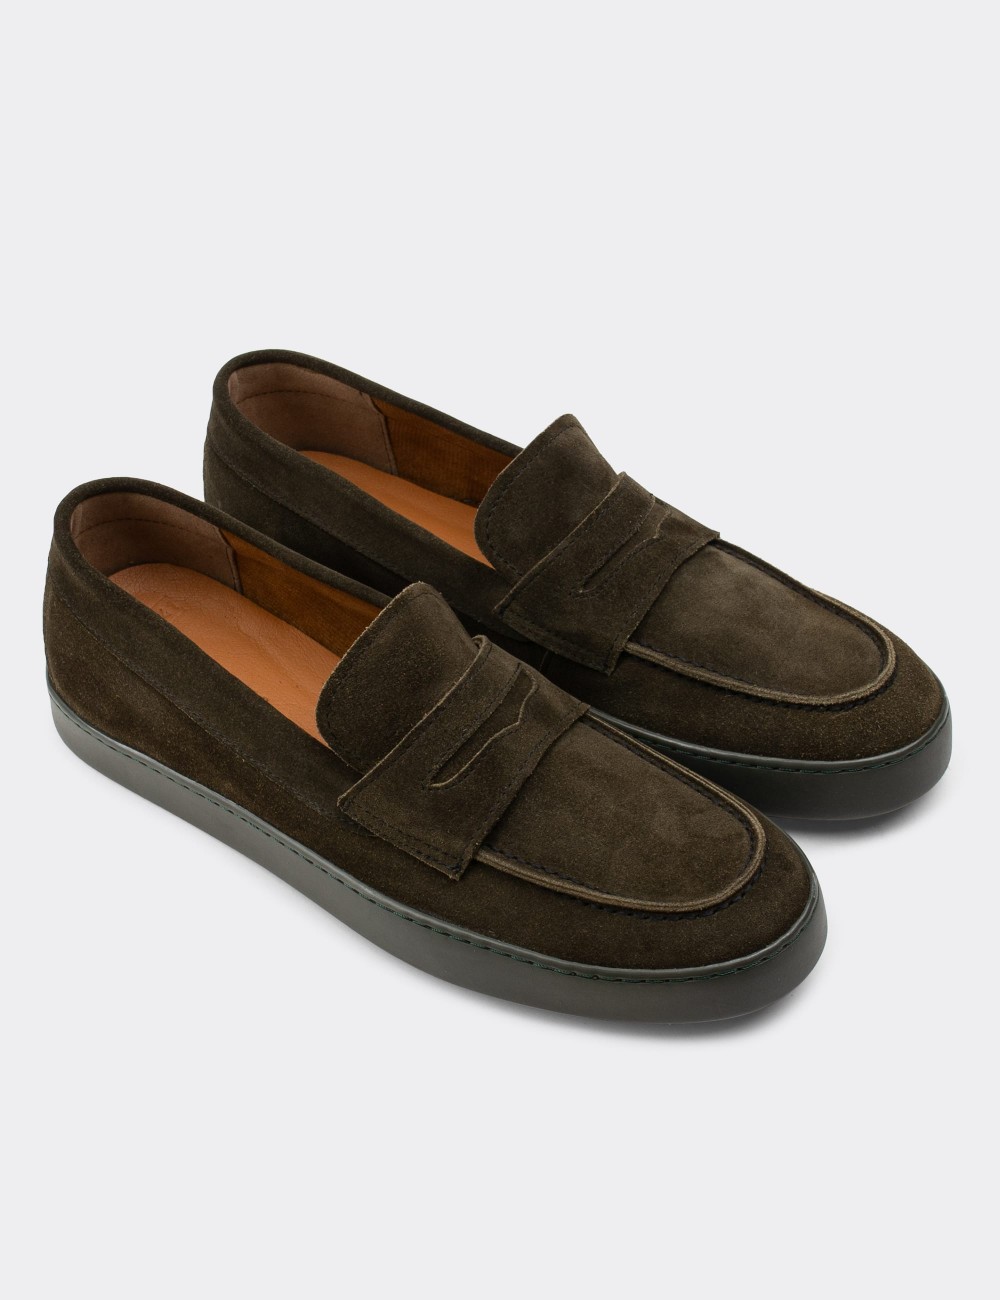 Black Suede Leather Loafers - 01870MHAKC01